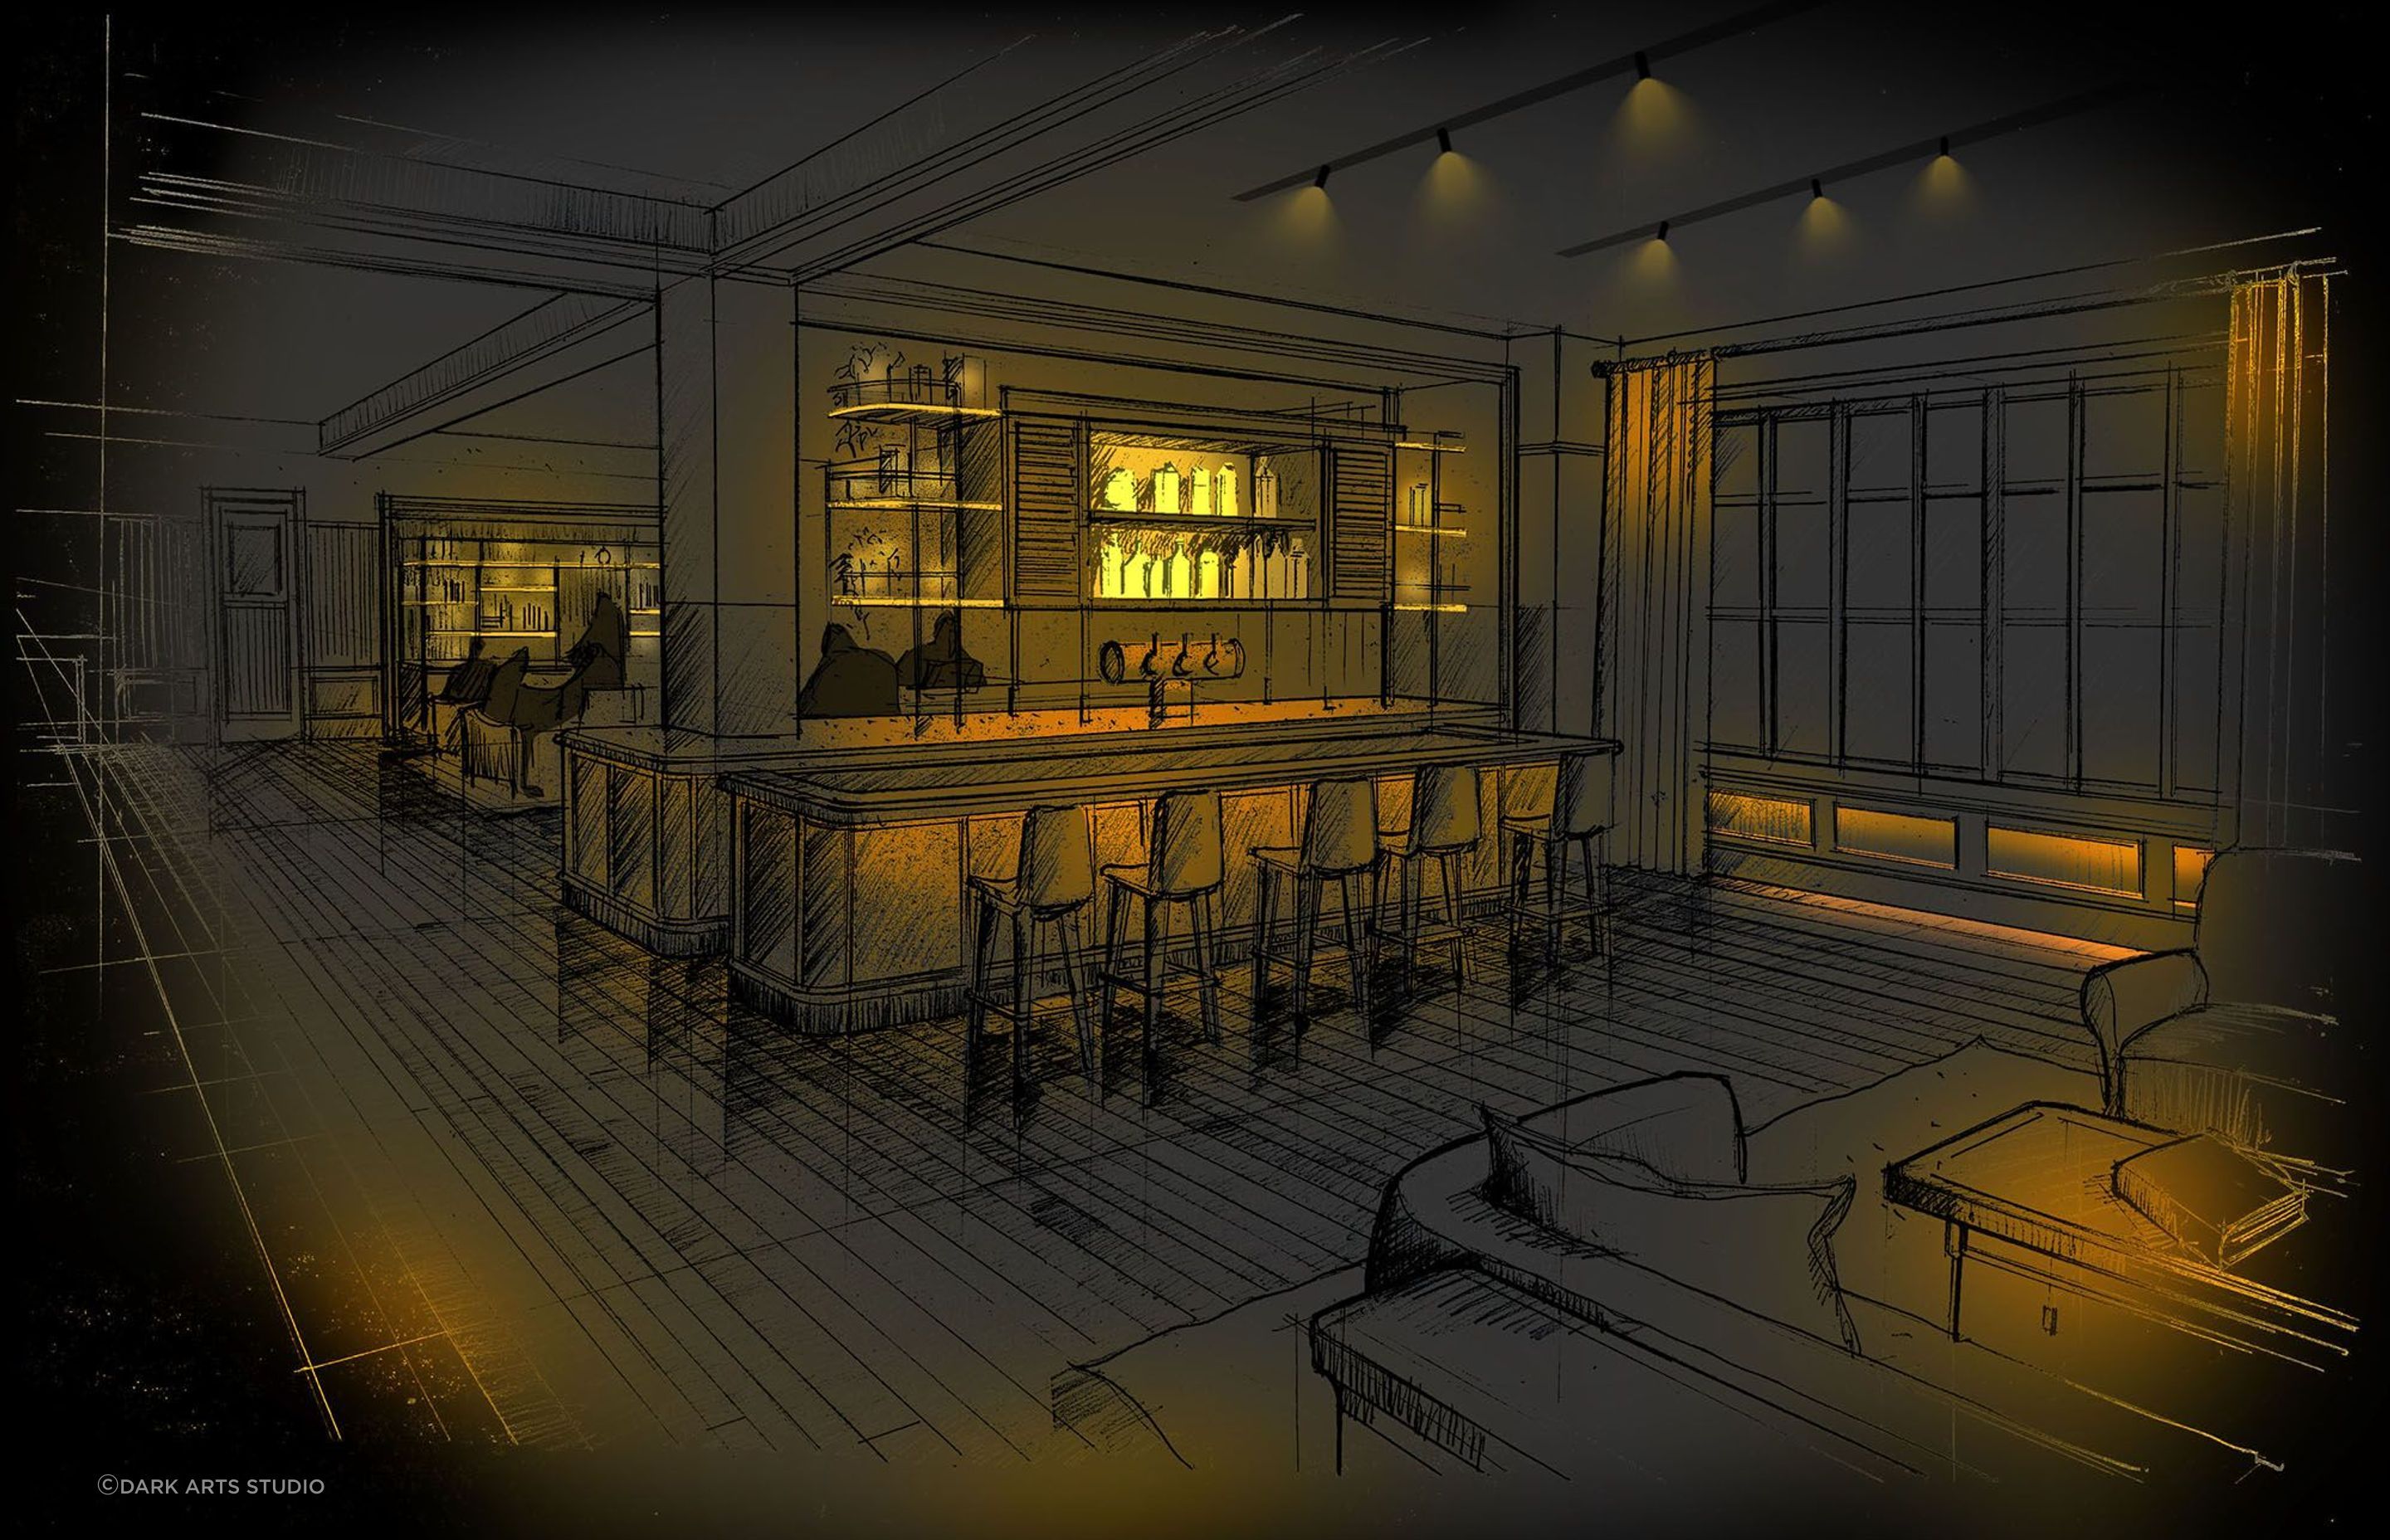 Darkarts Studio have created a beautiful lighting design concept for a cosy, warmly lit bar.